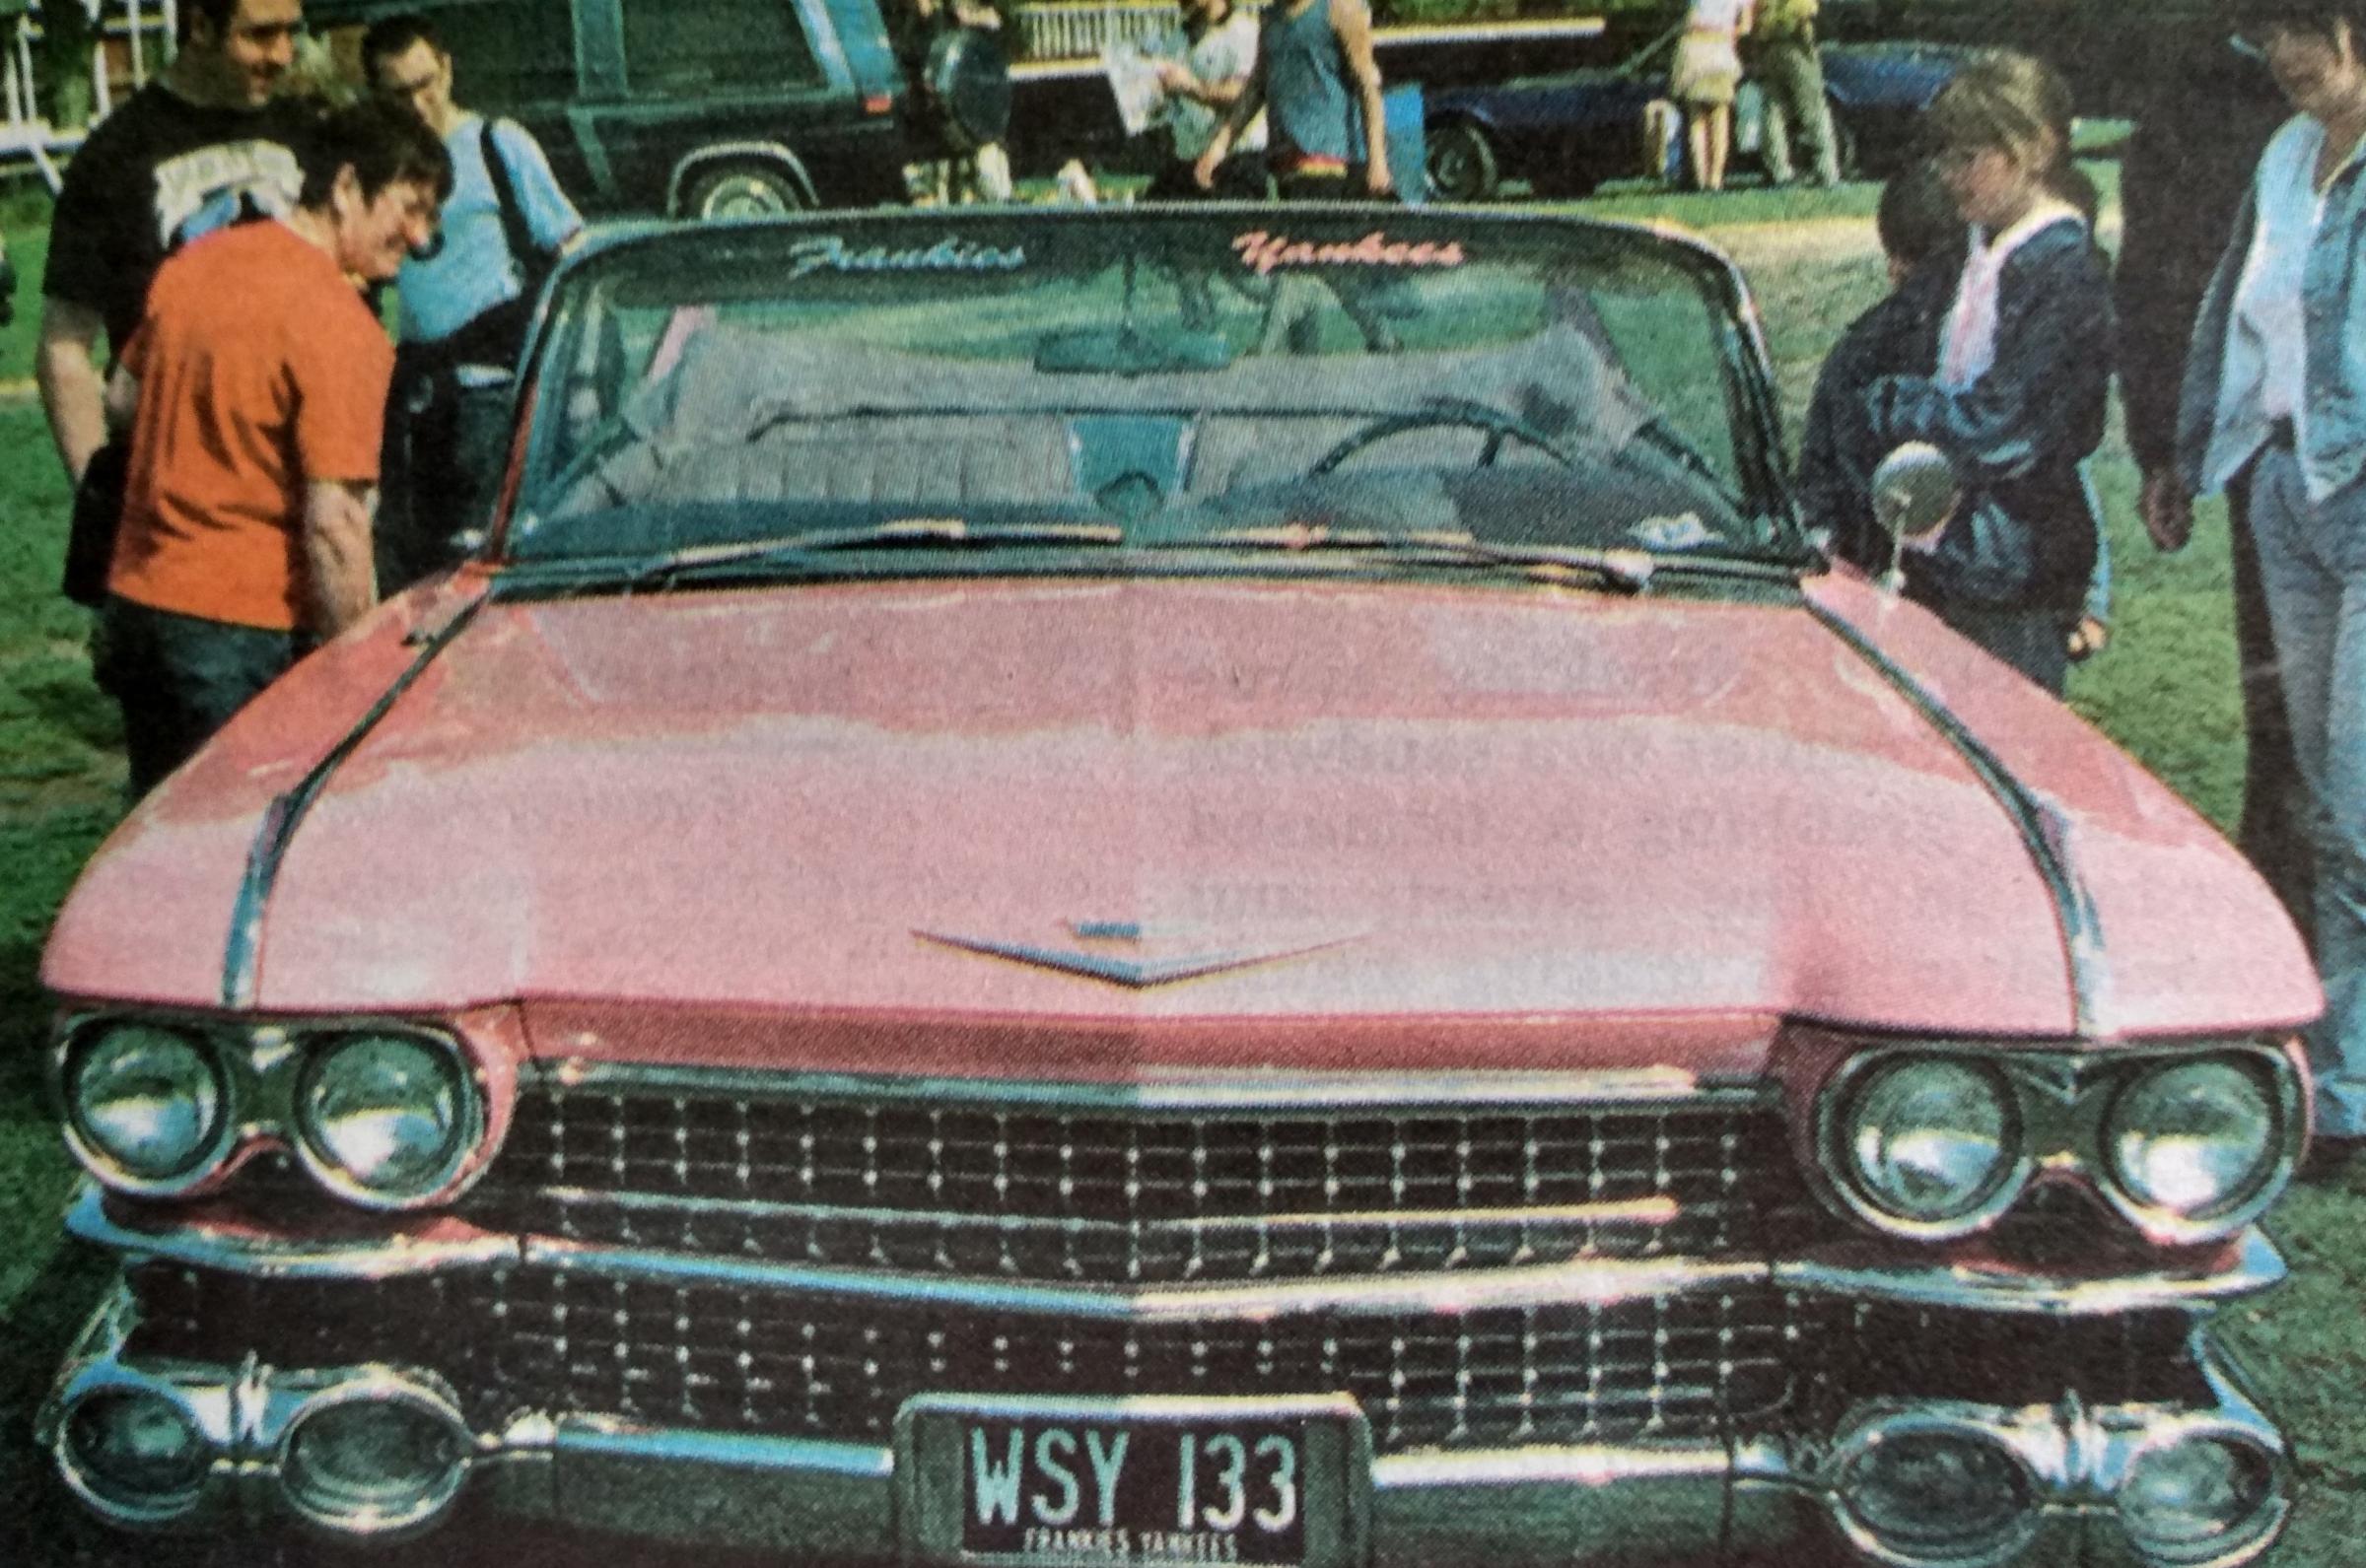 A pink Cadillac drew a lot of attention at the annual USA Automobile Show in May 2001